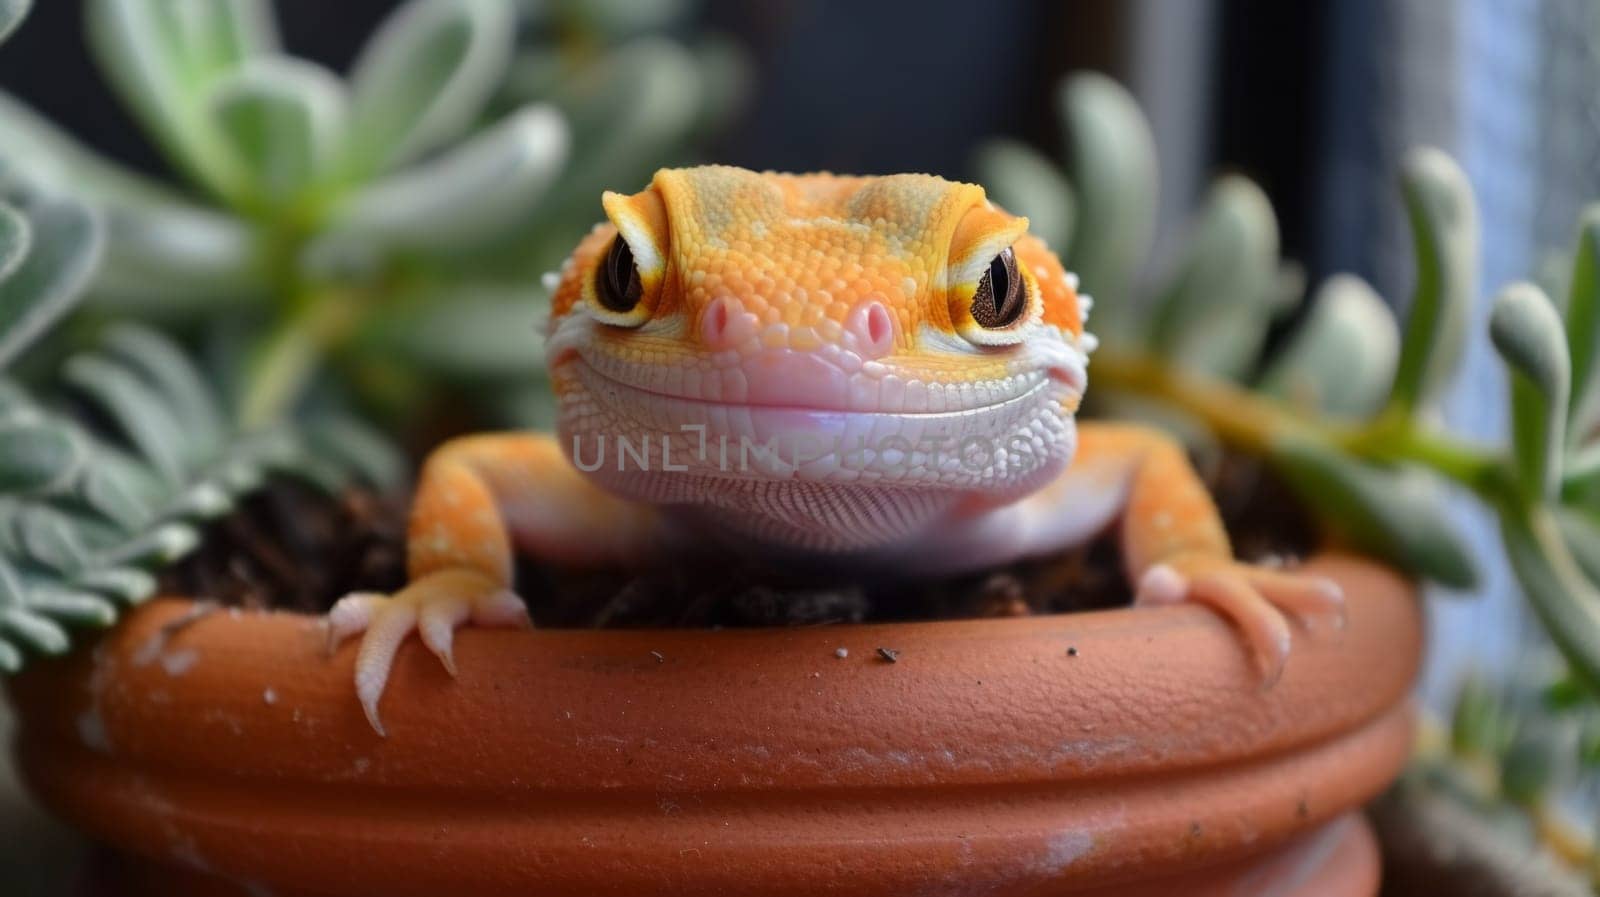 A lizard is sitting in a pot with some plants